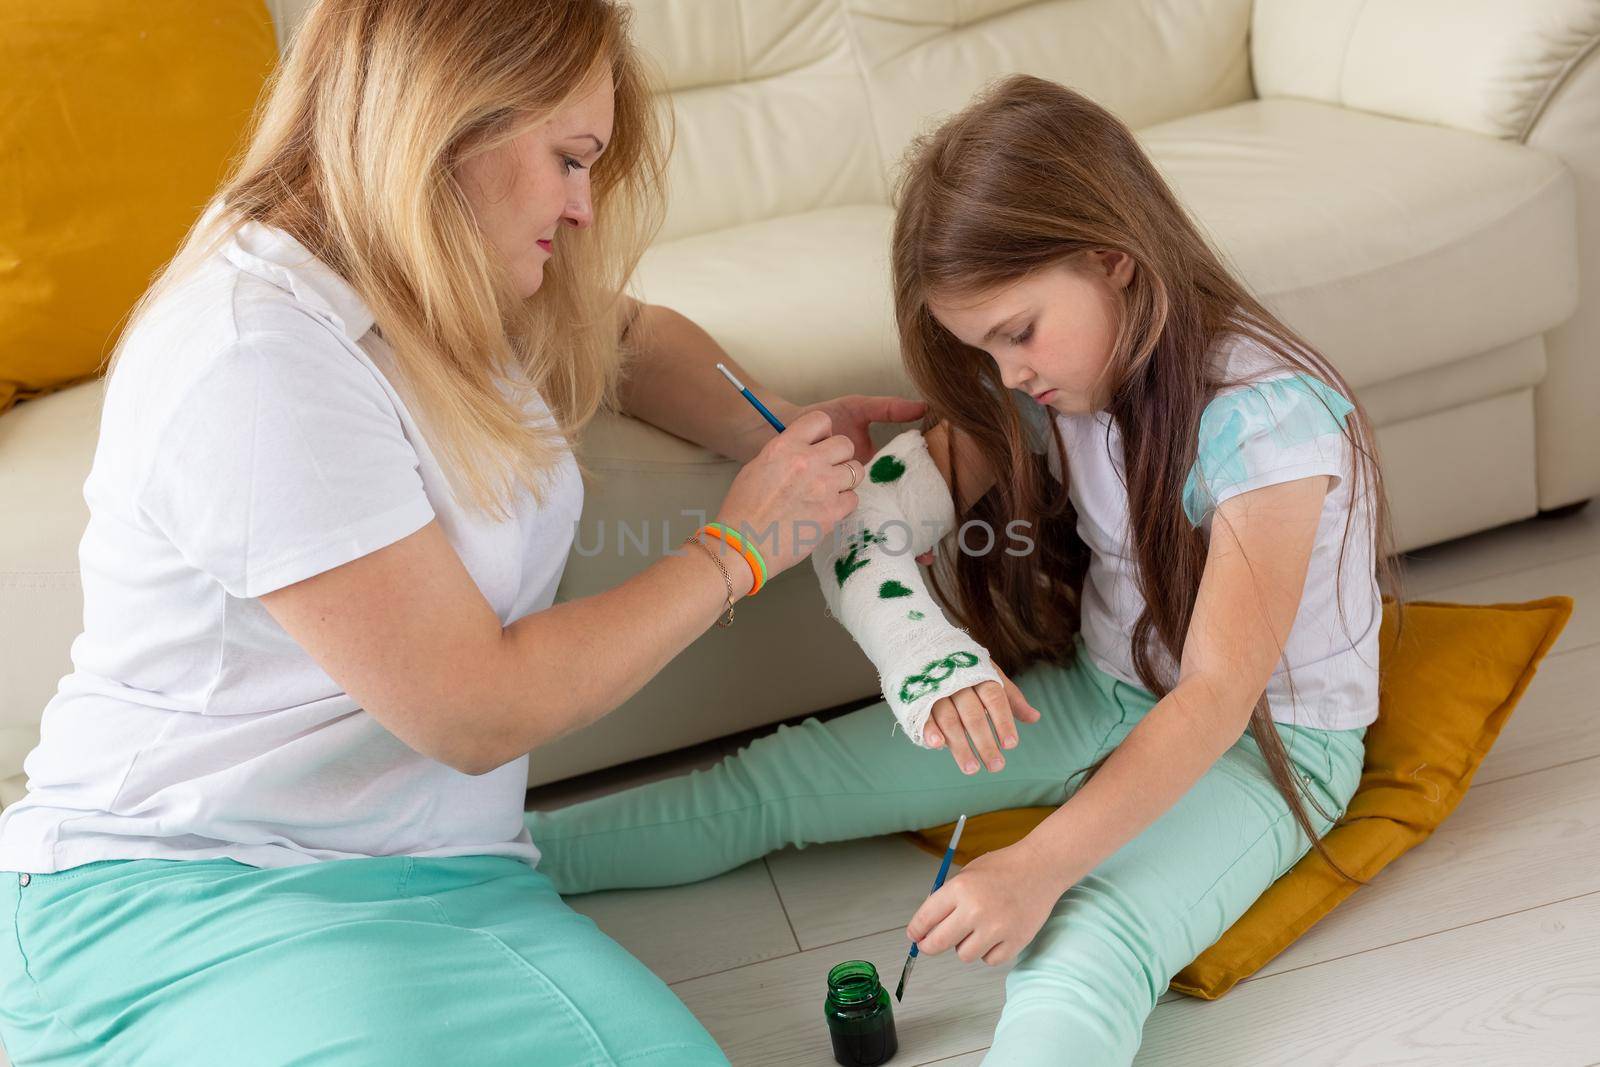 Mother and daughter drawing picture on bandage using paints. Play therapy concept. by Satura86